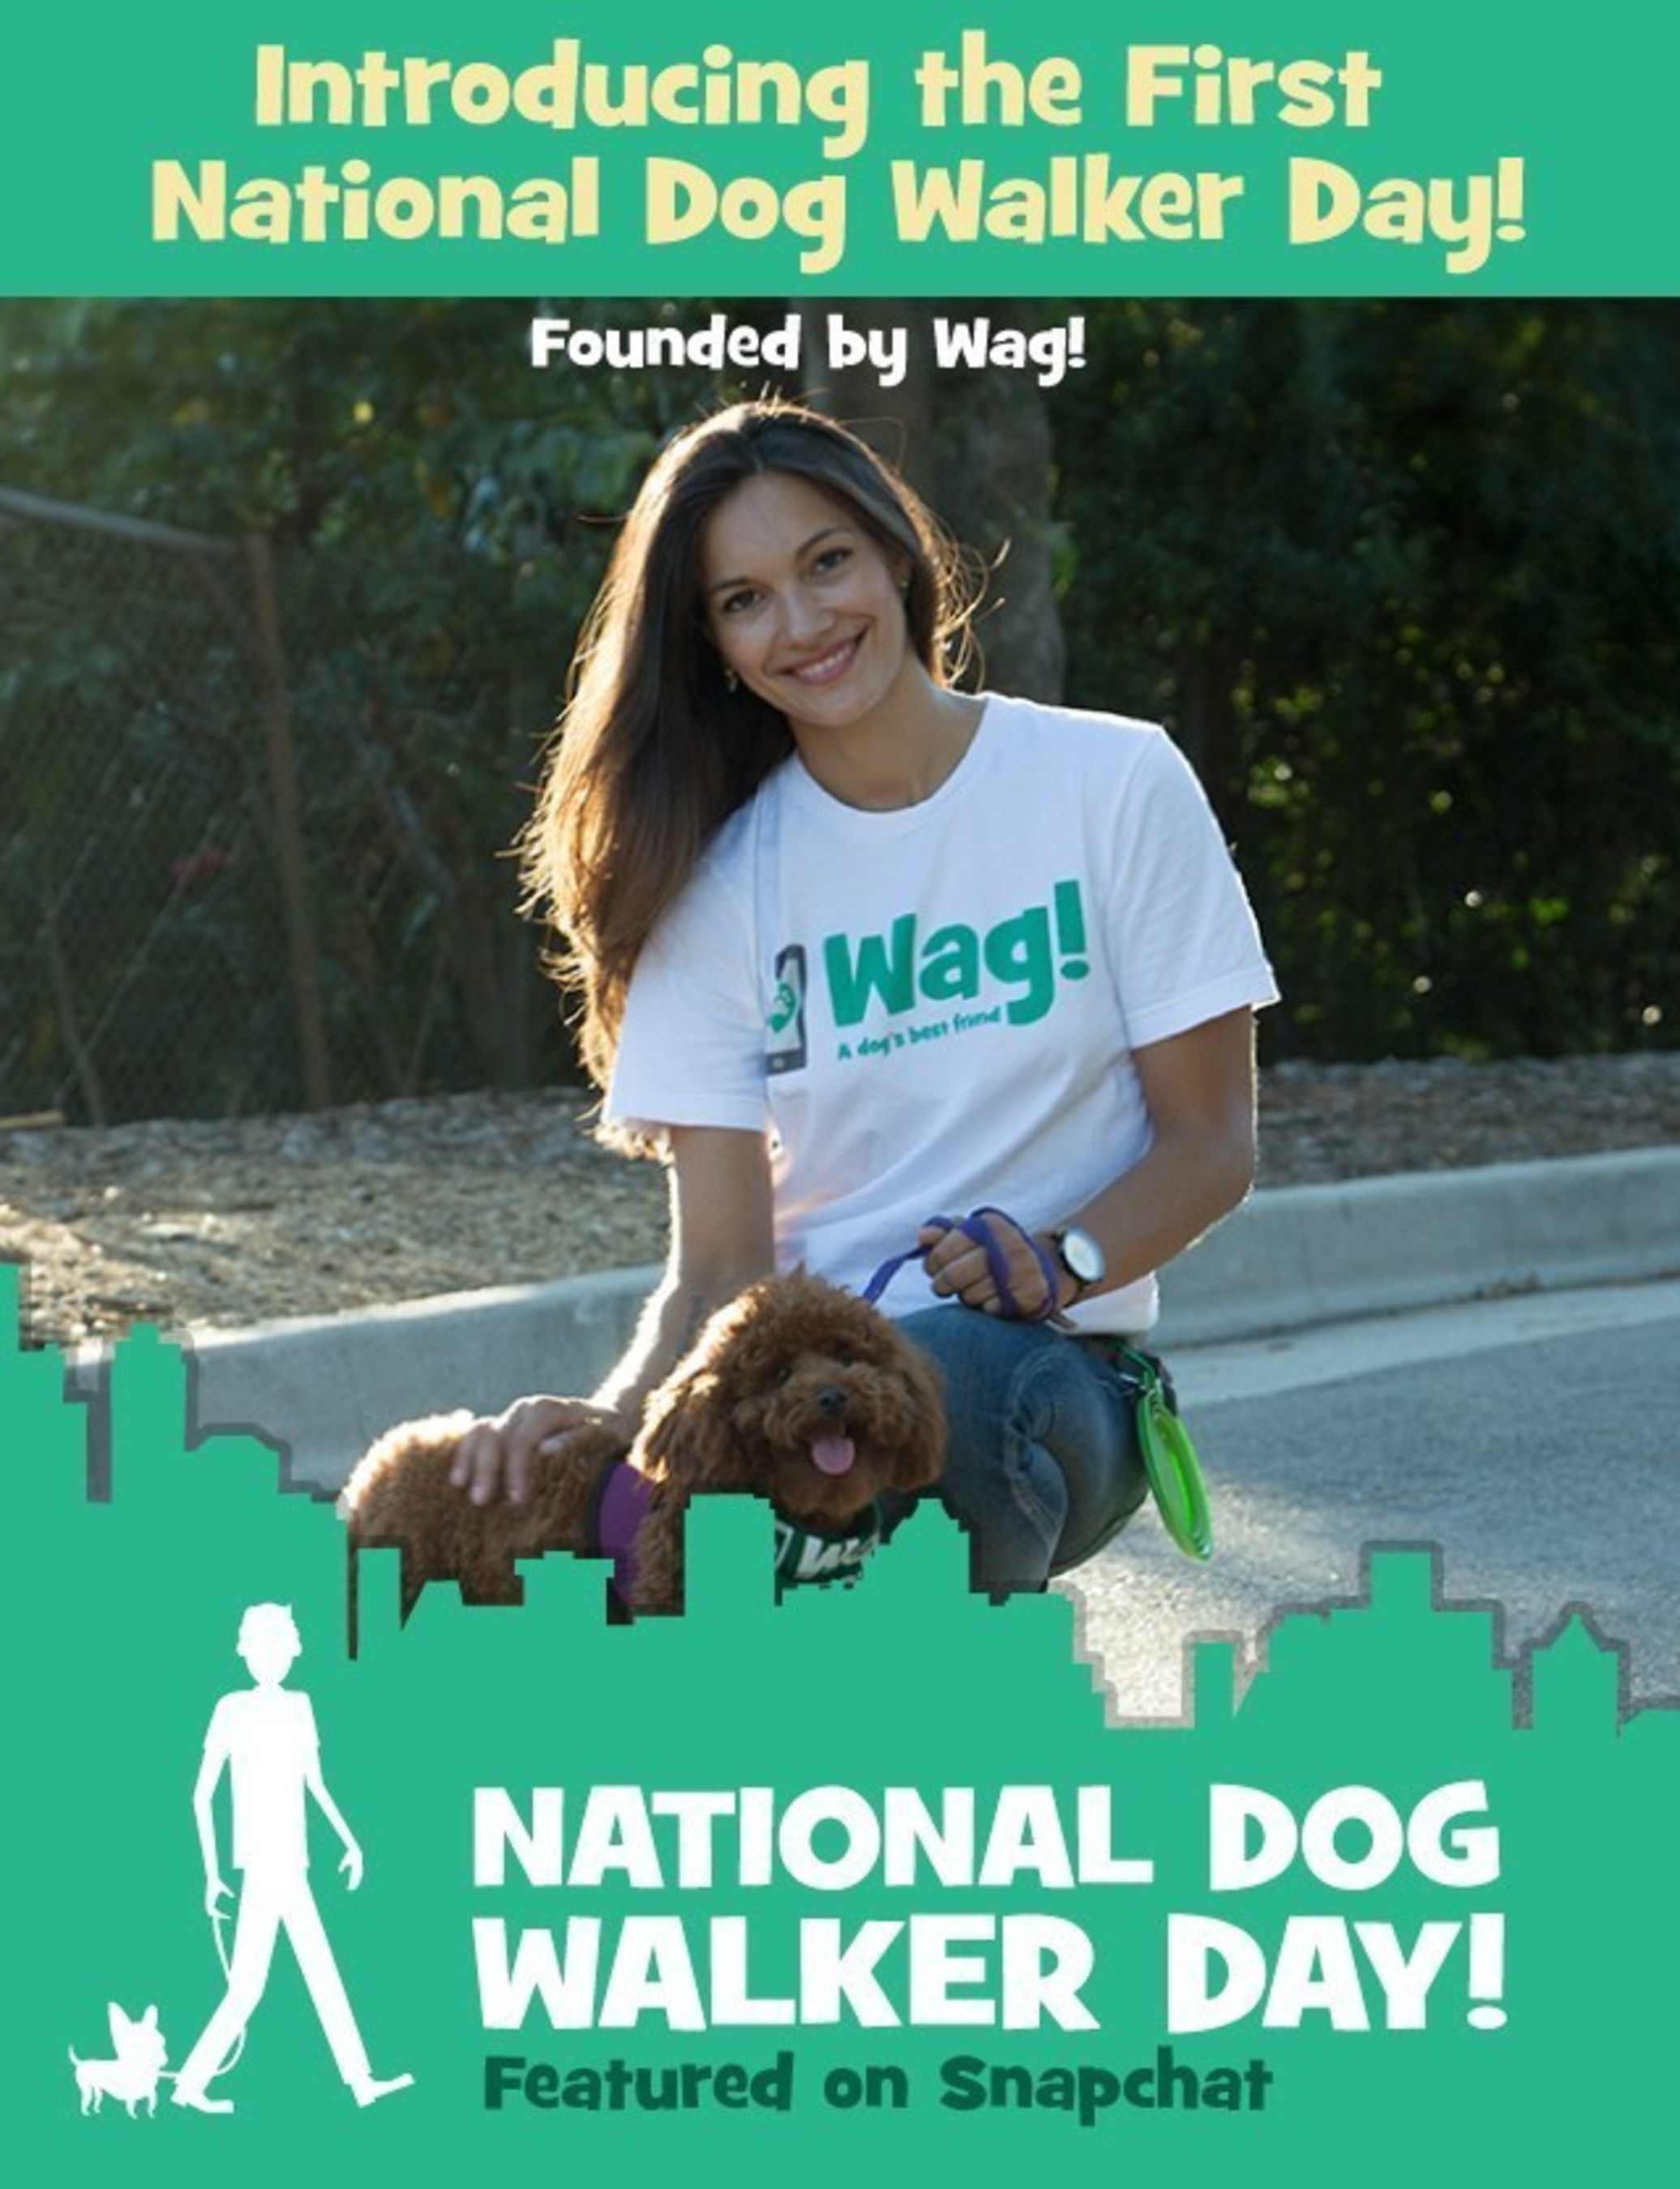 September 8 is the first annual National Dog Walker Appreciation Day, founded by Wag!, the on-demand dog walking app.